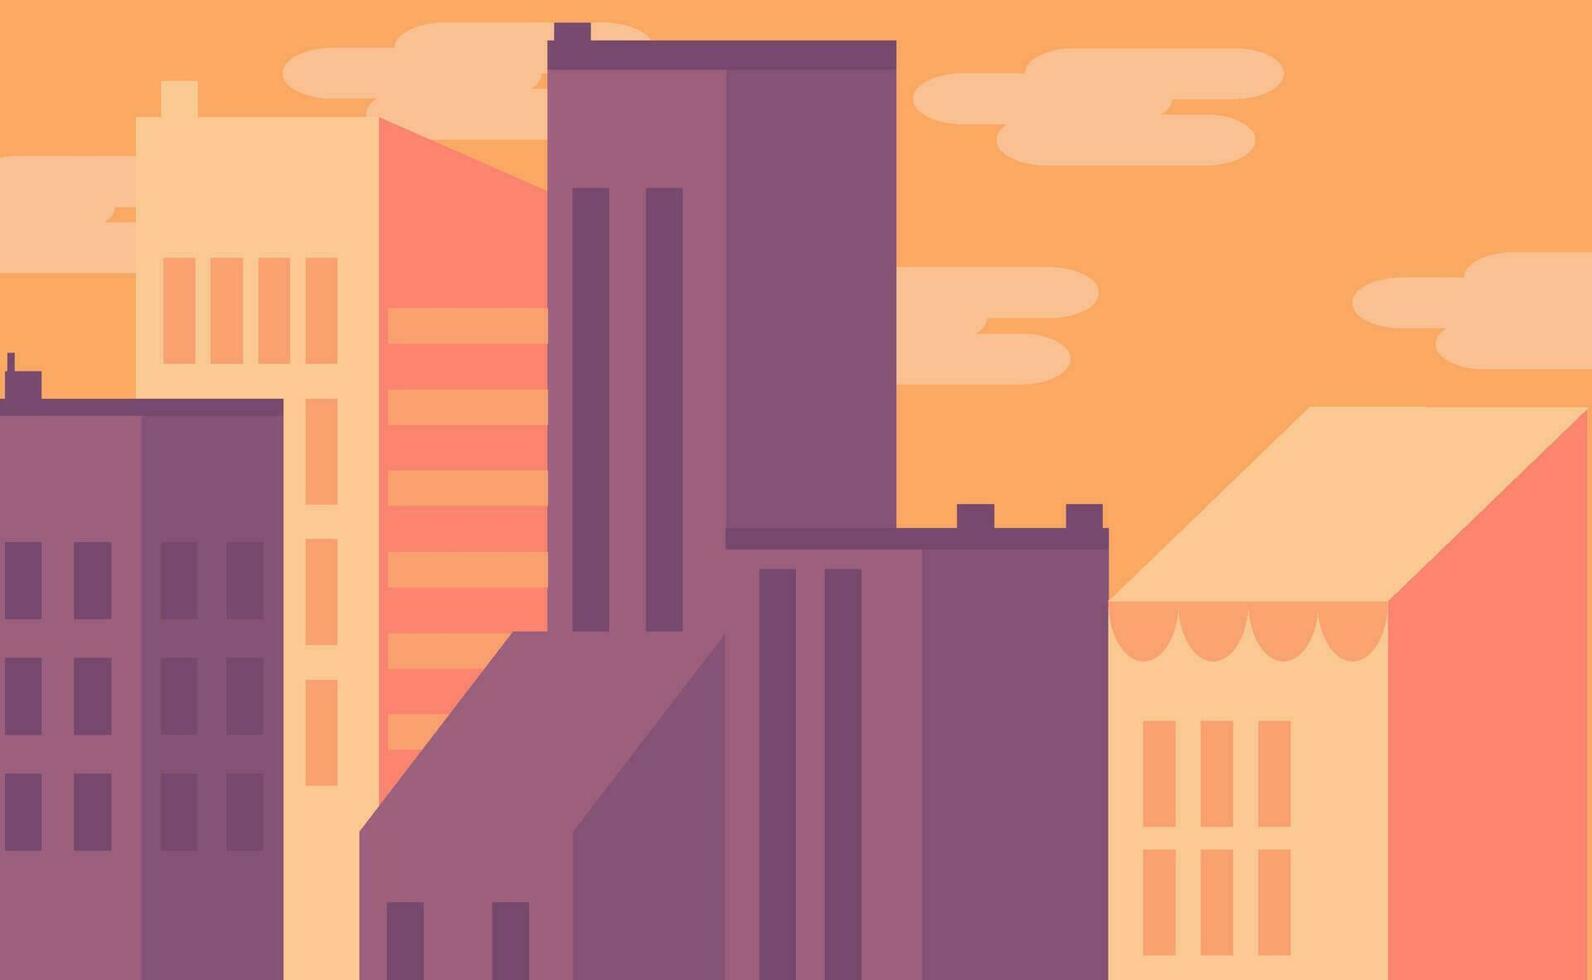 Minimalistic City Graphic with Geometric Forms vector